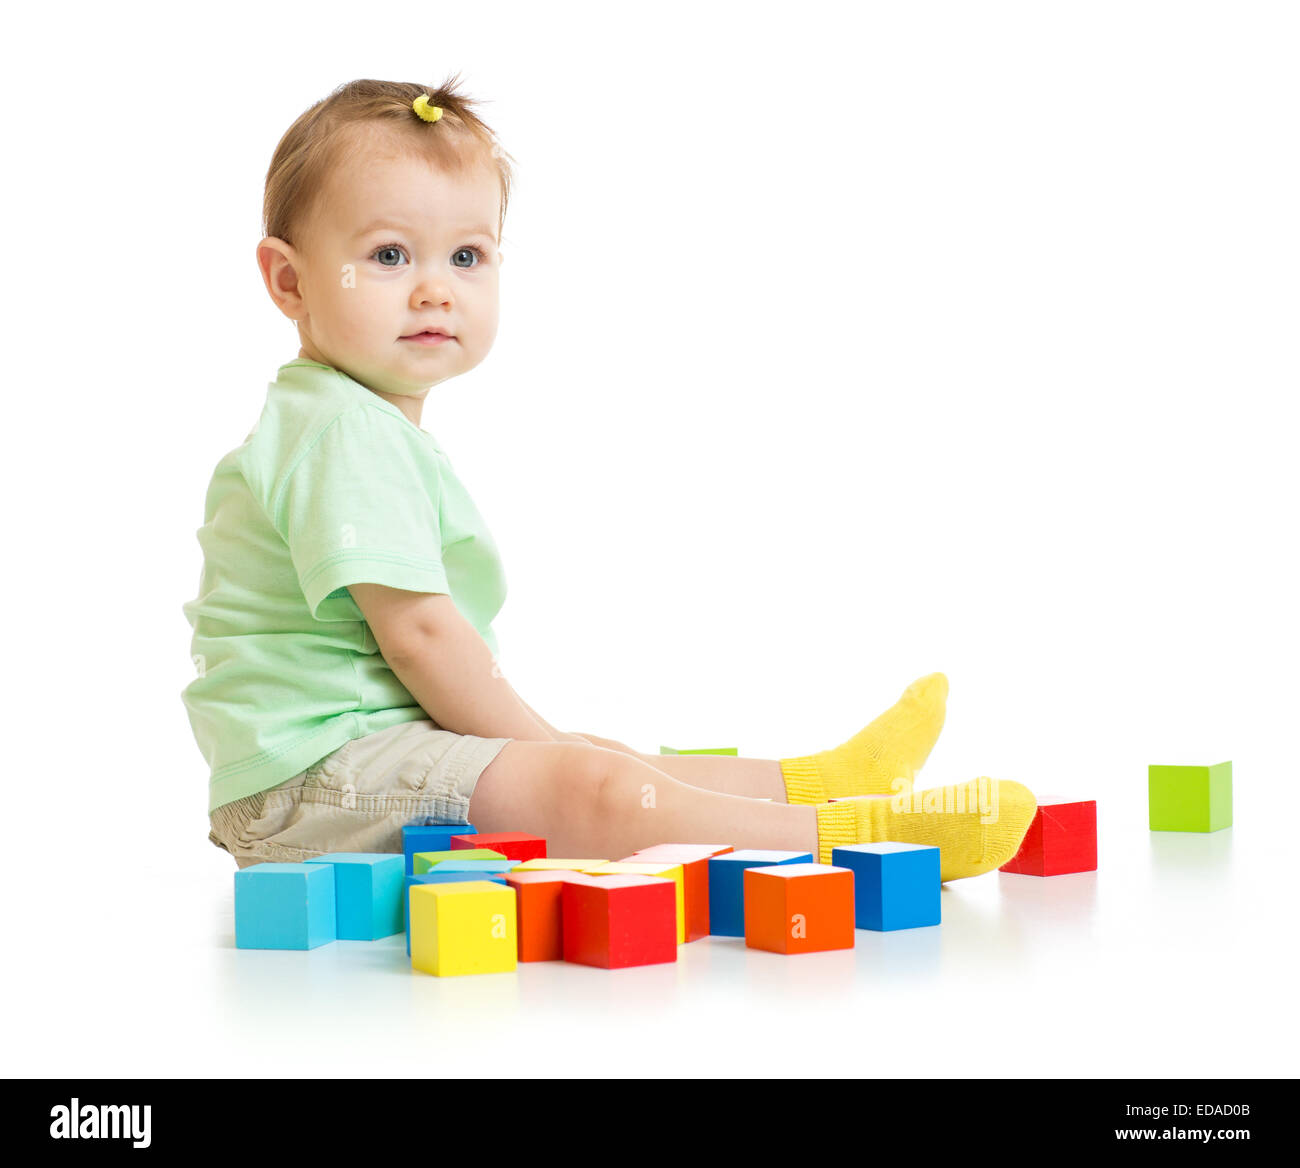 baby playing with colorful blocks isolated Stock Photo